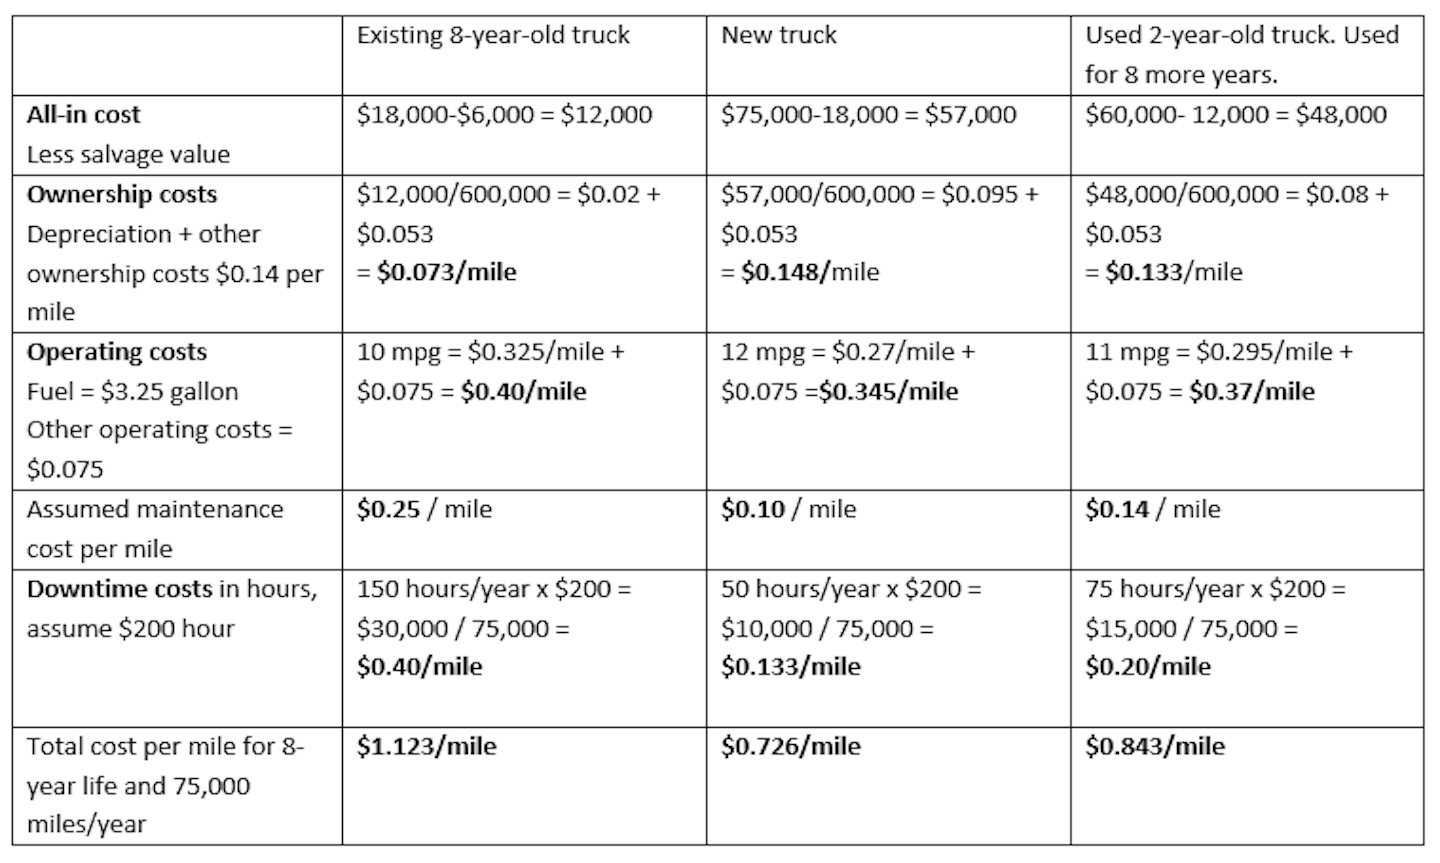 Fig. 2: Comparison of total cost per mile for vehicles in different stages of their lifecycles.